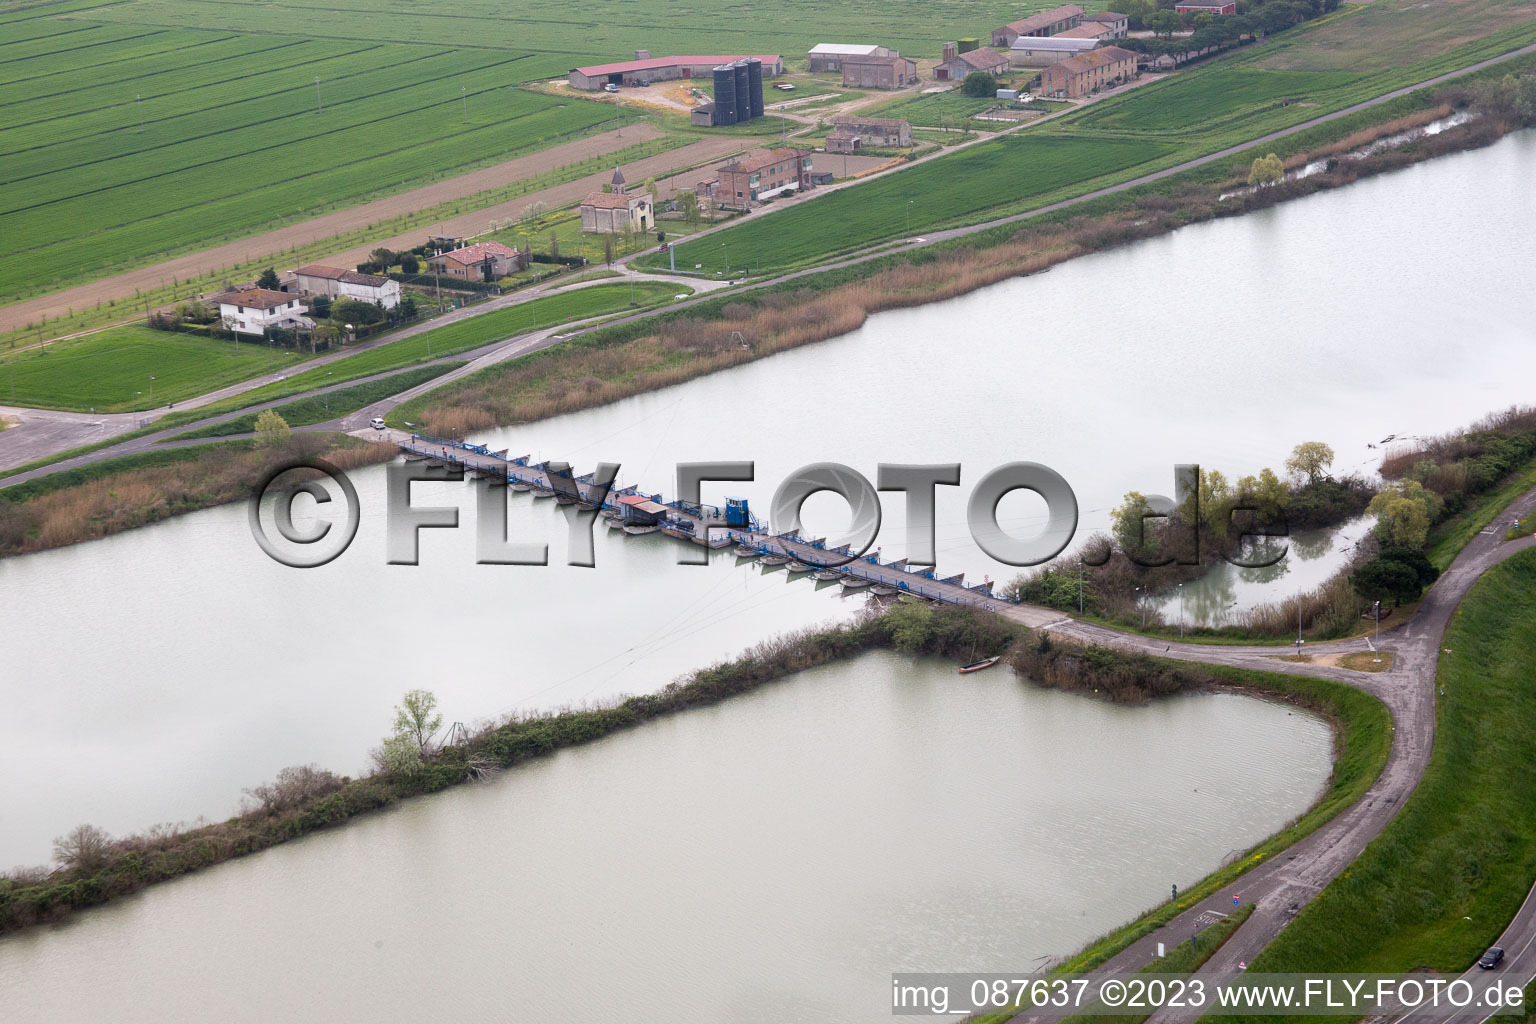 Aerial view of Gorino in the state Veneto, Italy